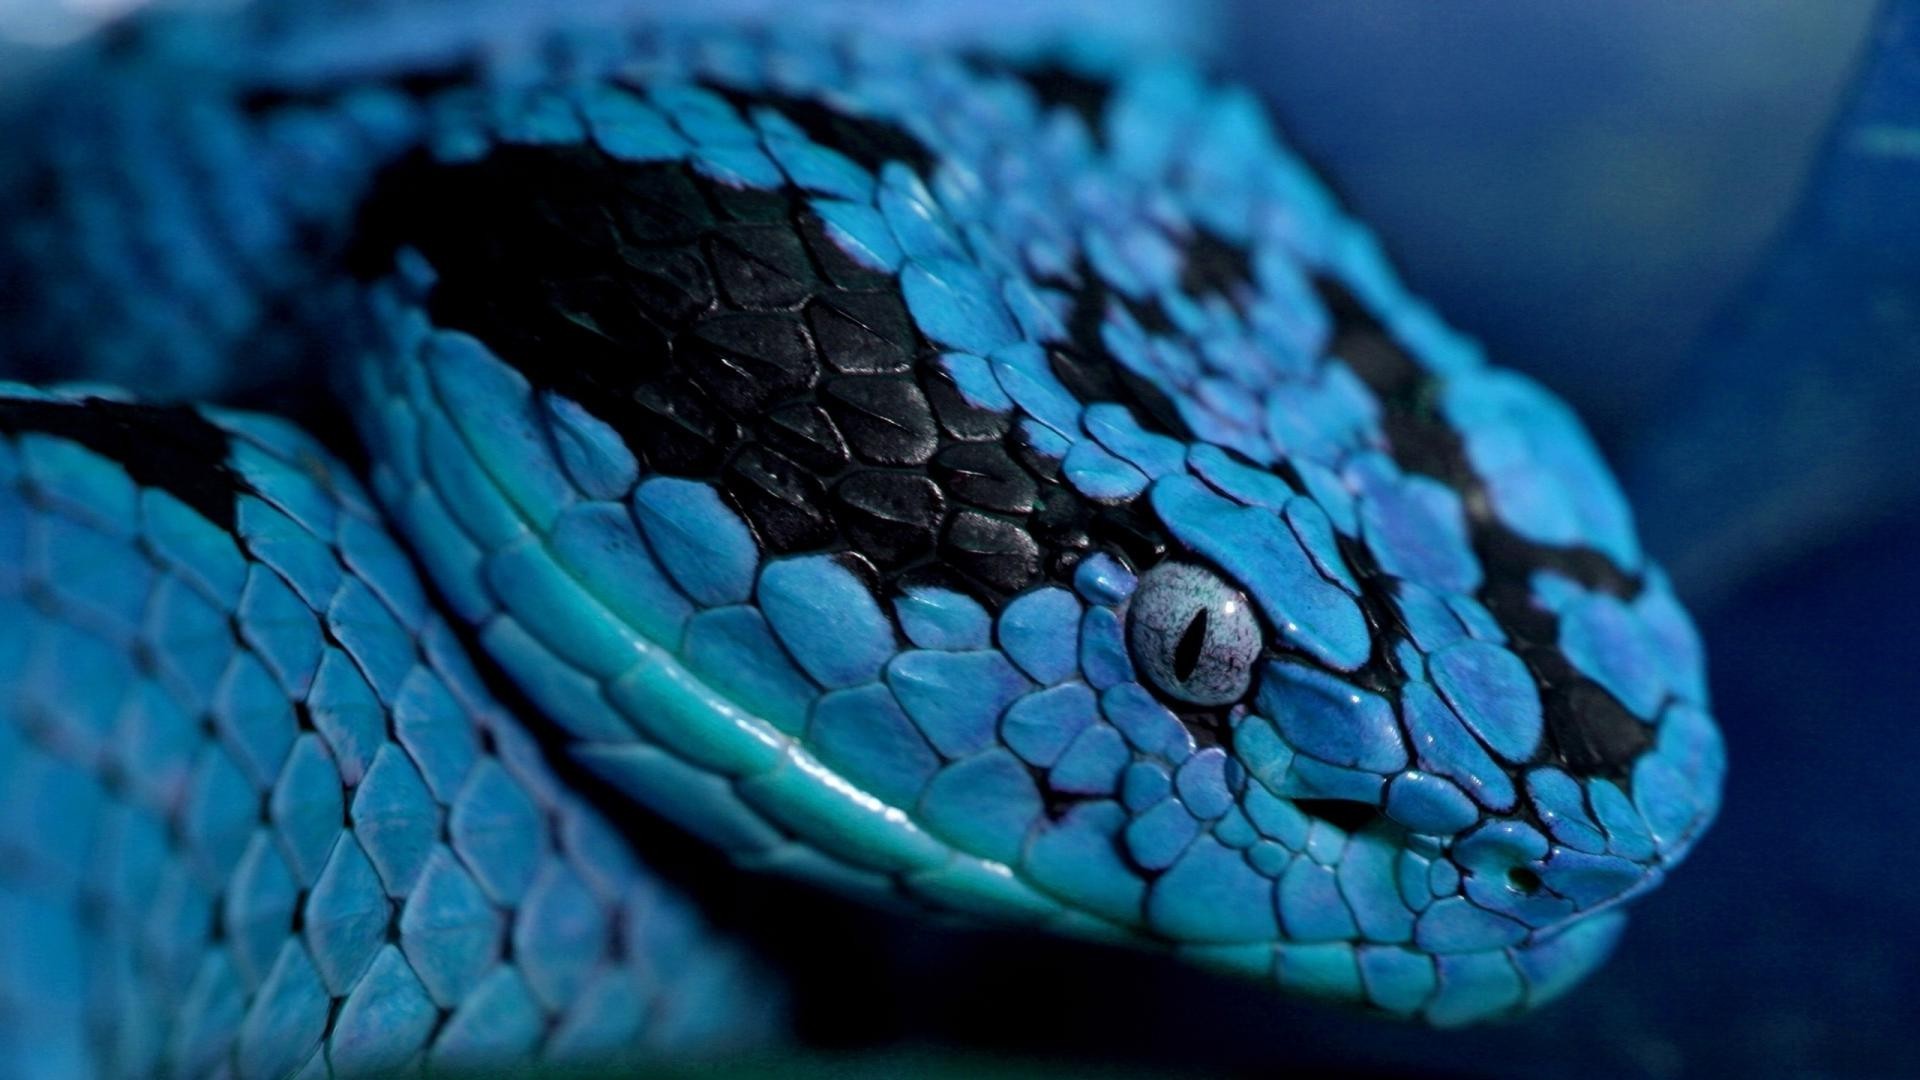 1920x1080 Digital Images Of Snakes